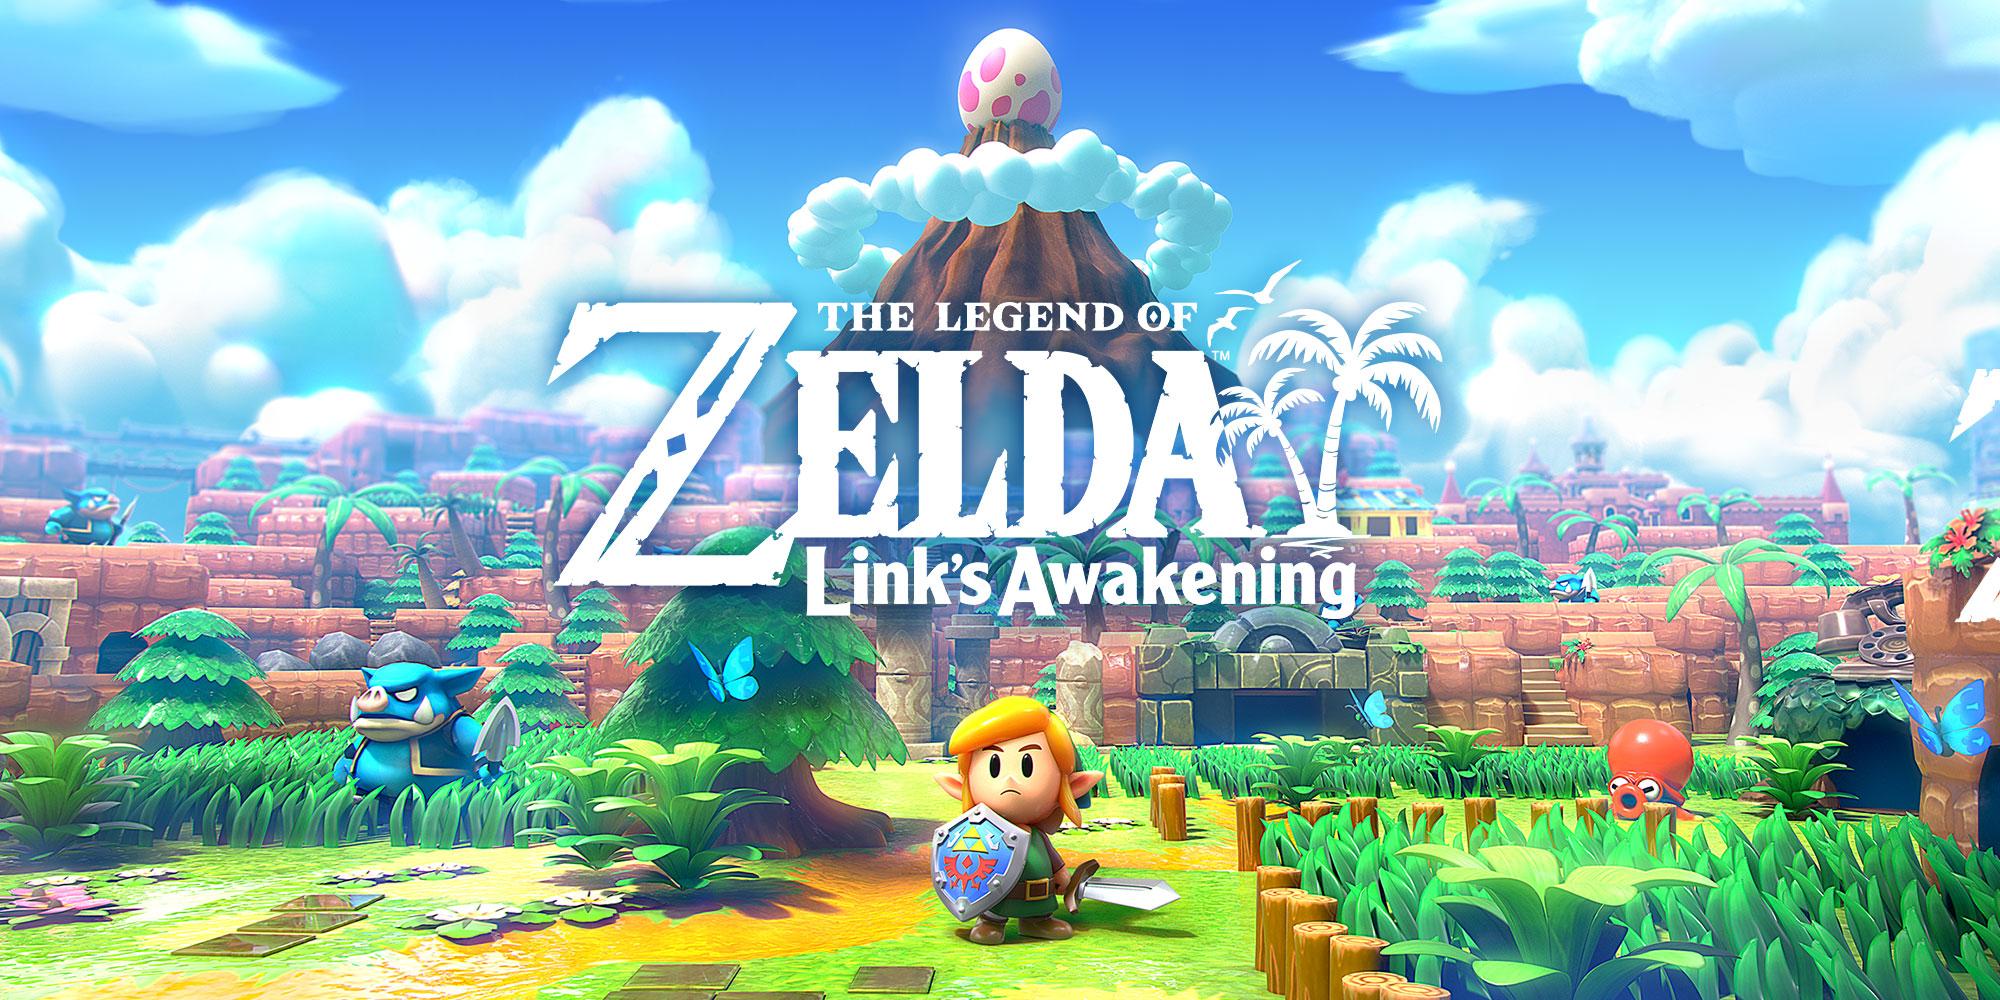 Learn more about The Legend of Zelda: Link's Awakening